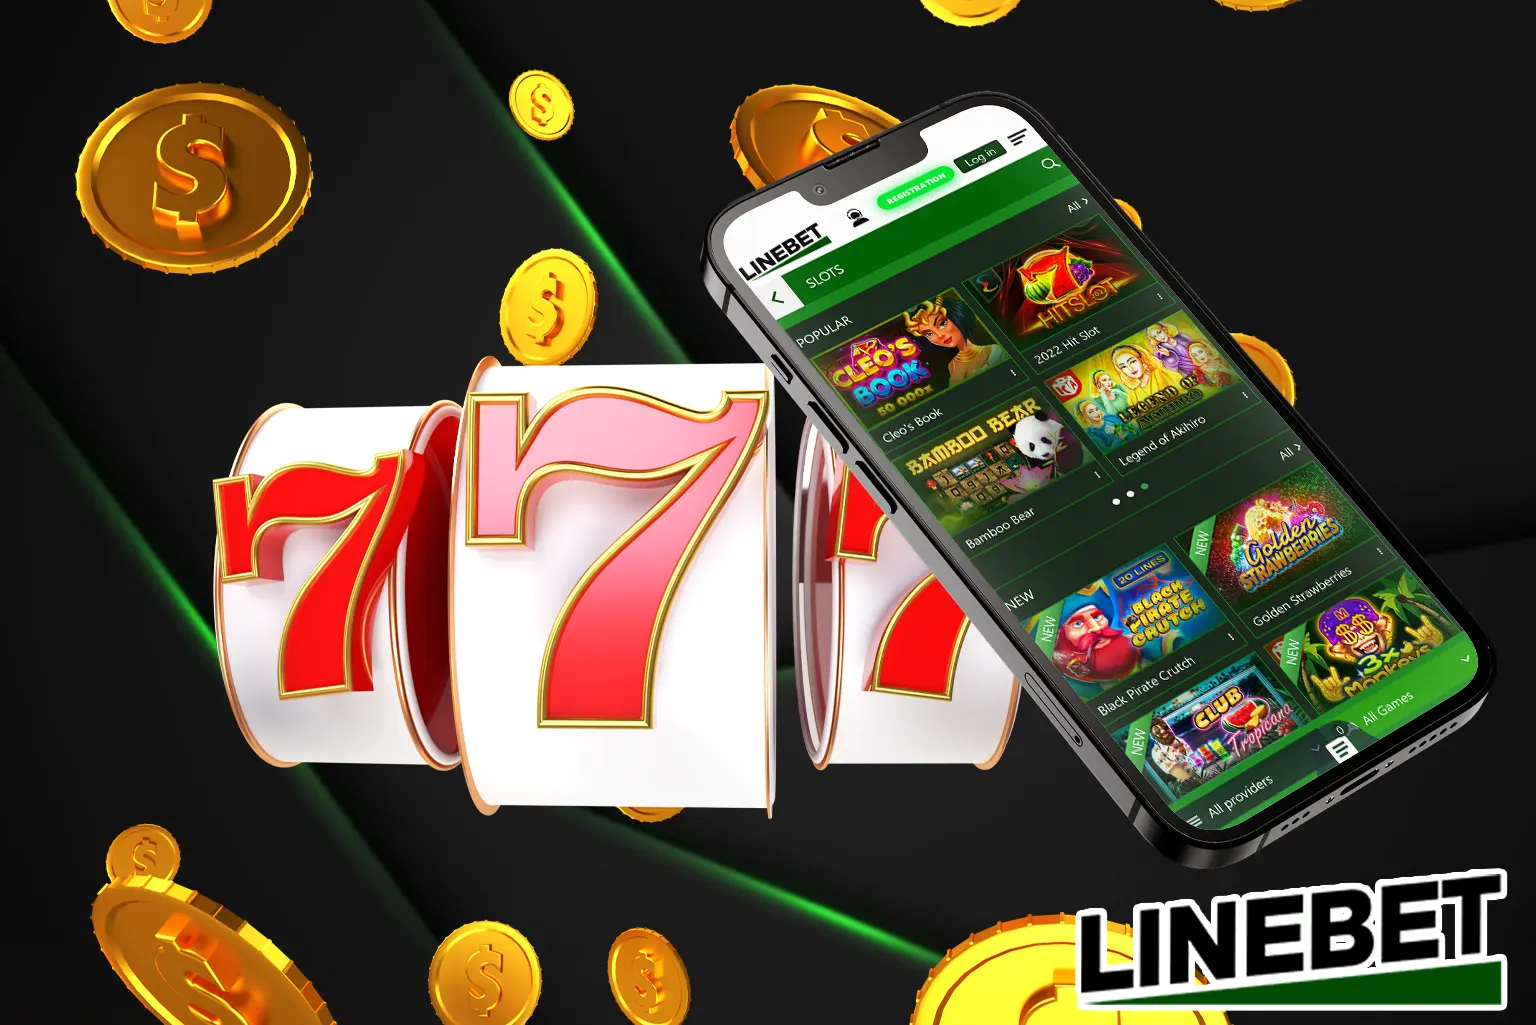 Dive into the world of virtual casino machines right on your smartphone at Linebet.